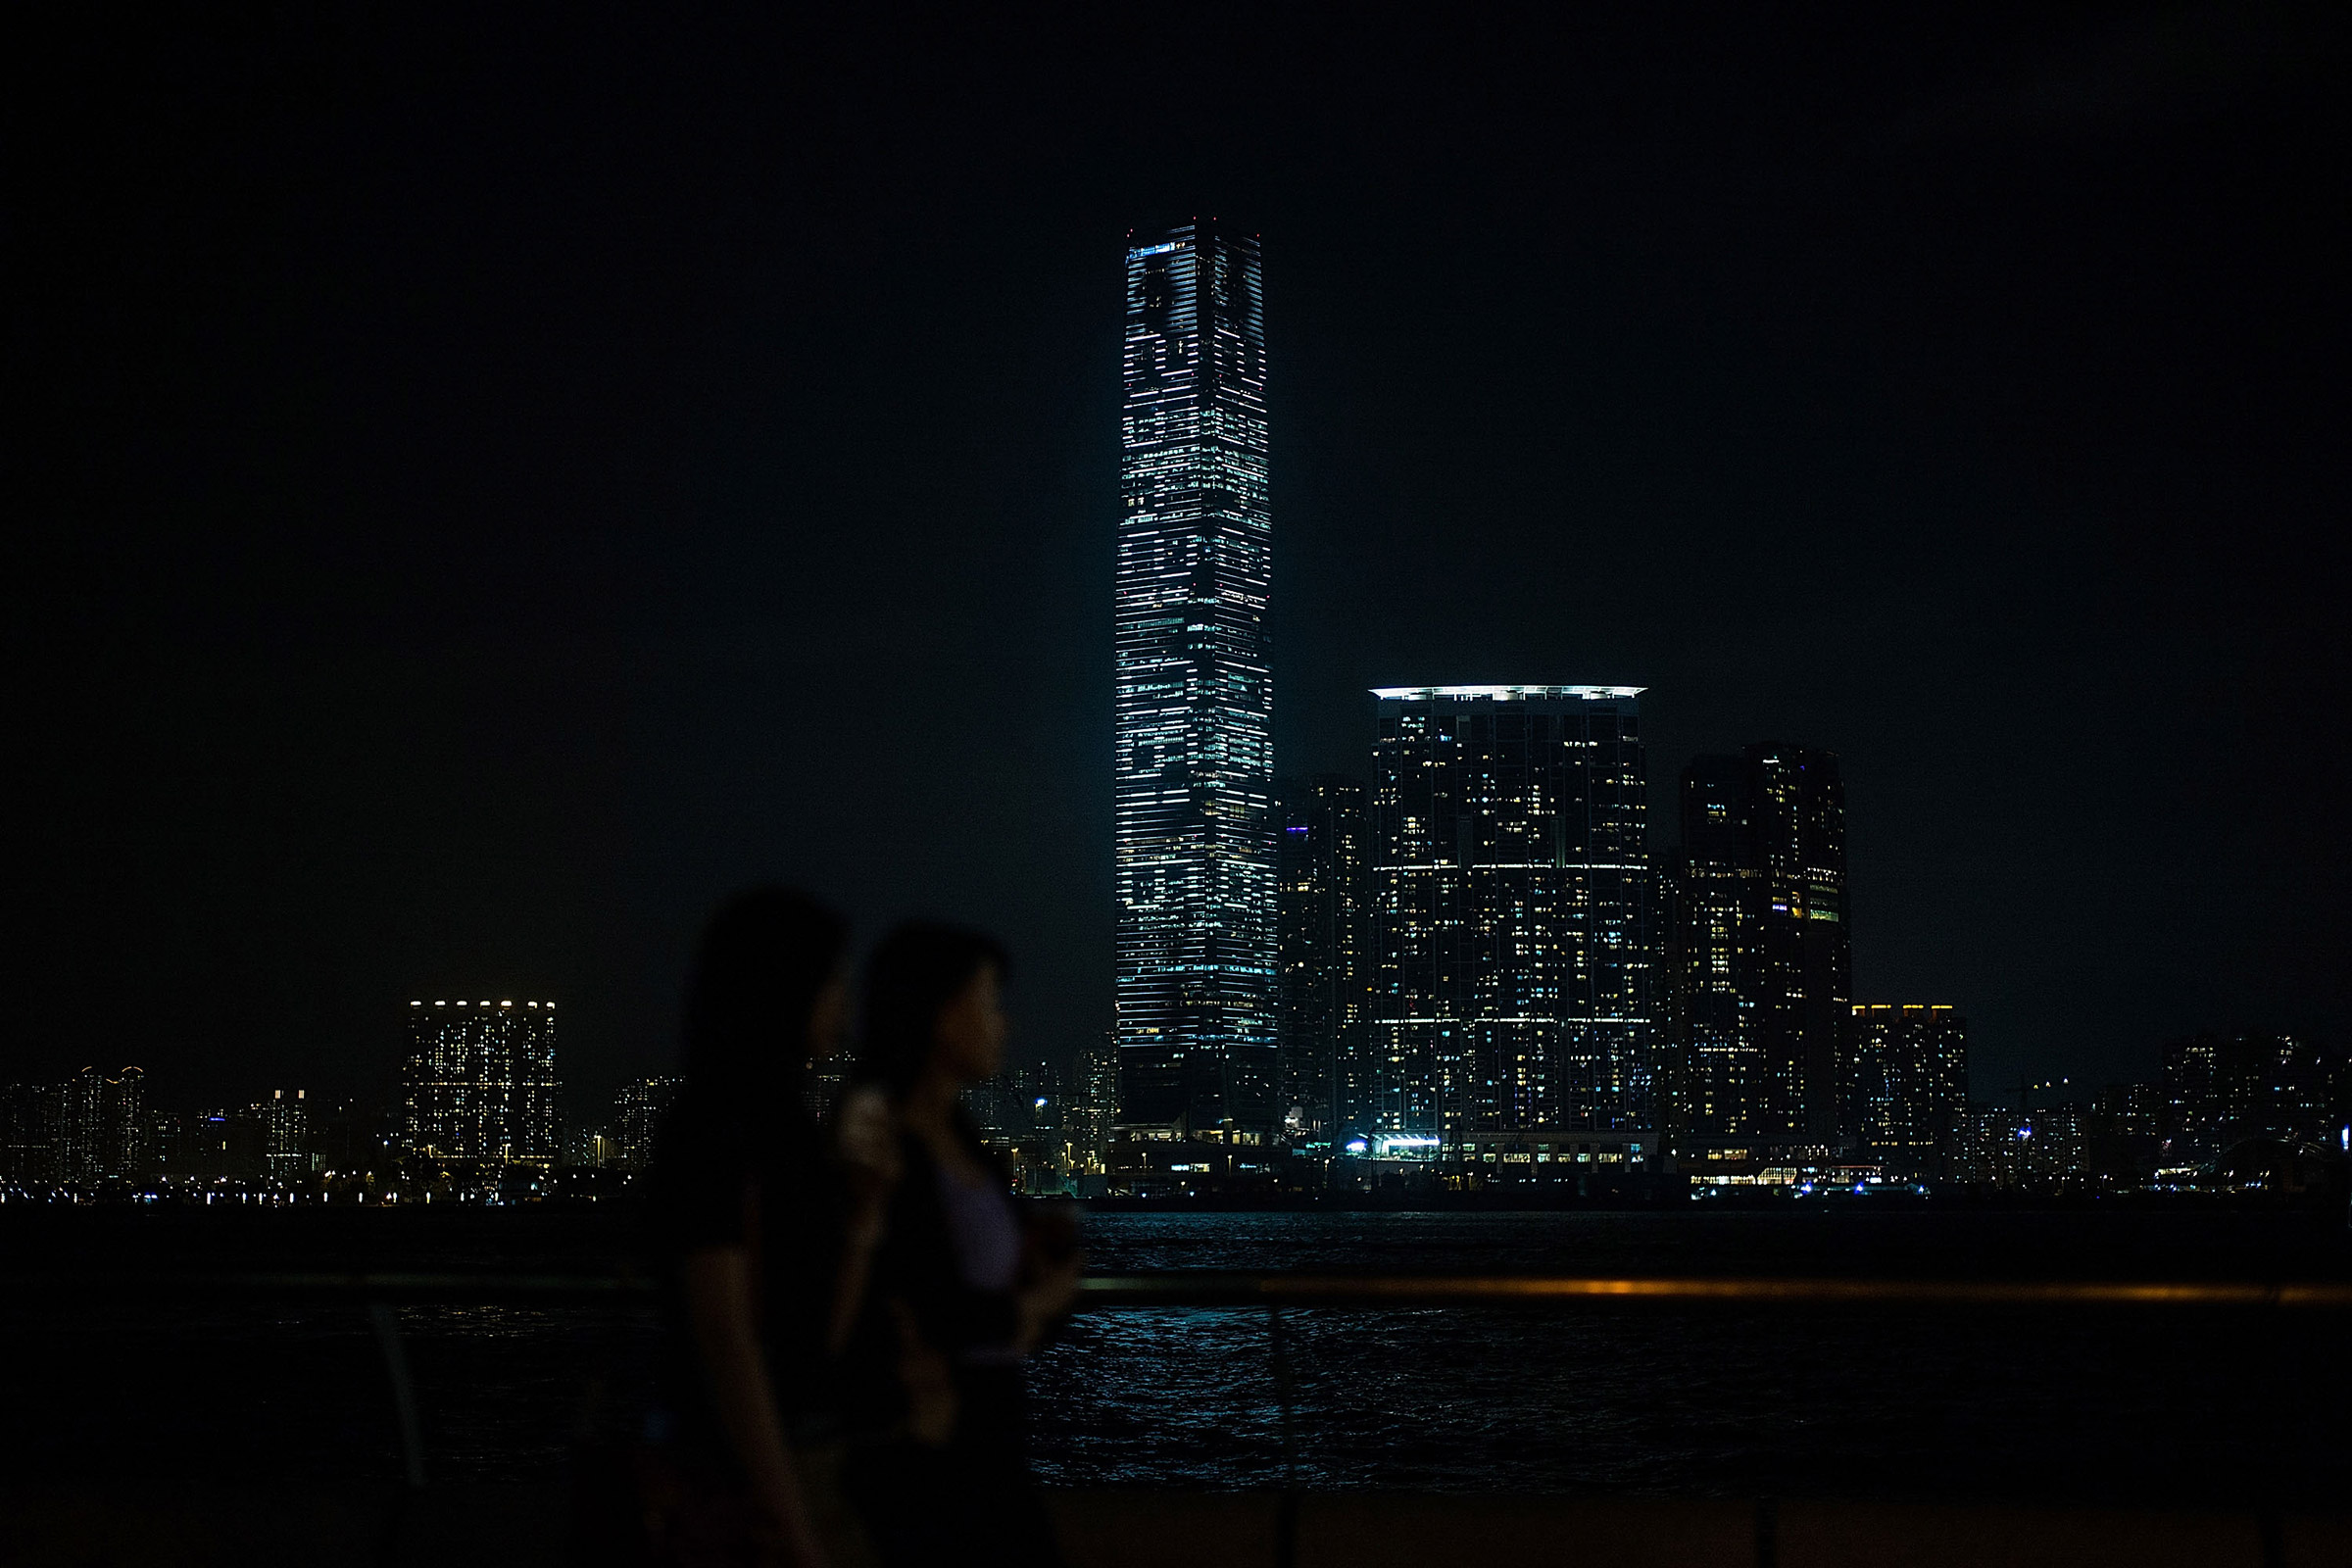 A light show on the facade of the International Commerce Center